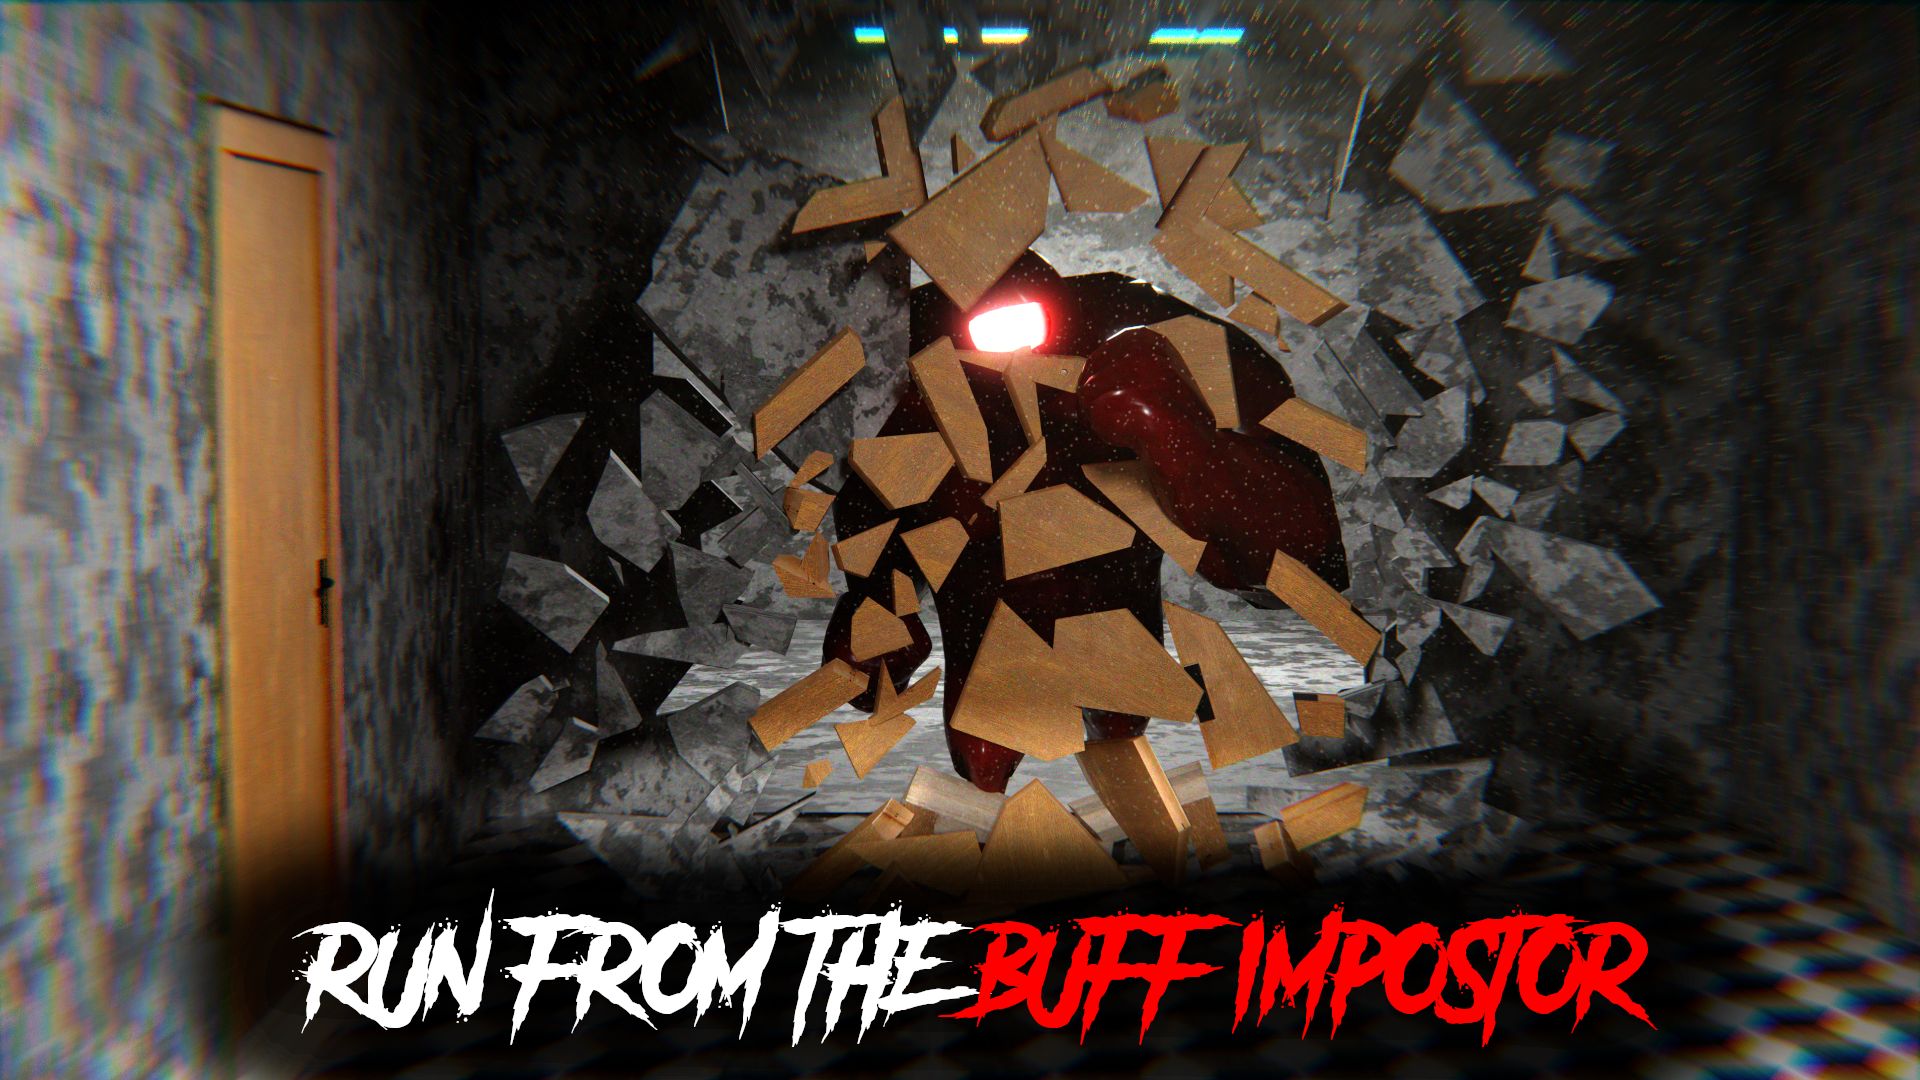 Download Buff Imposter Scary Creepy Horror Android free game.